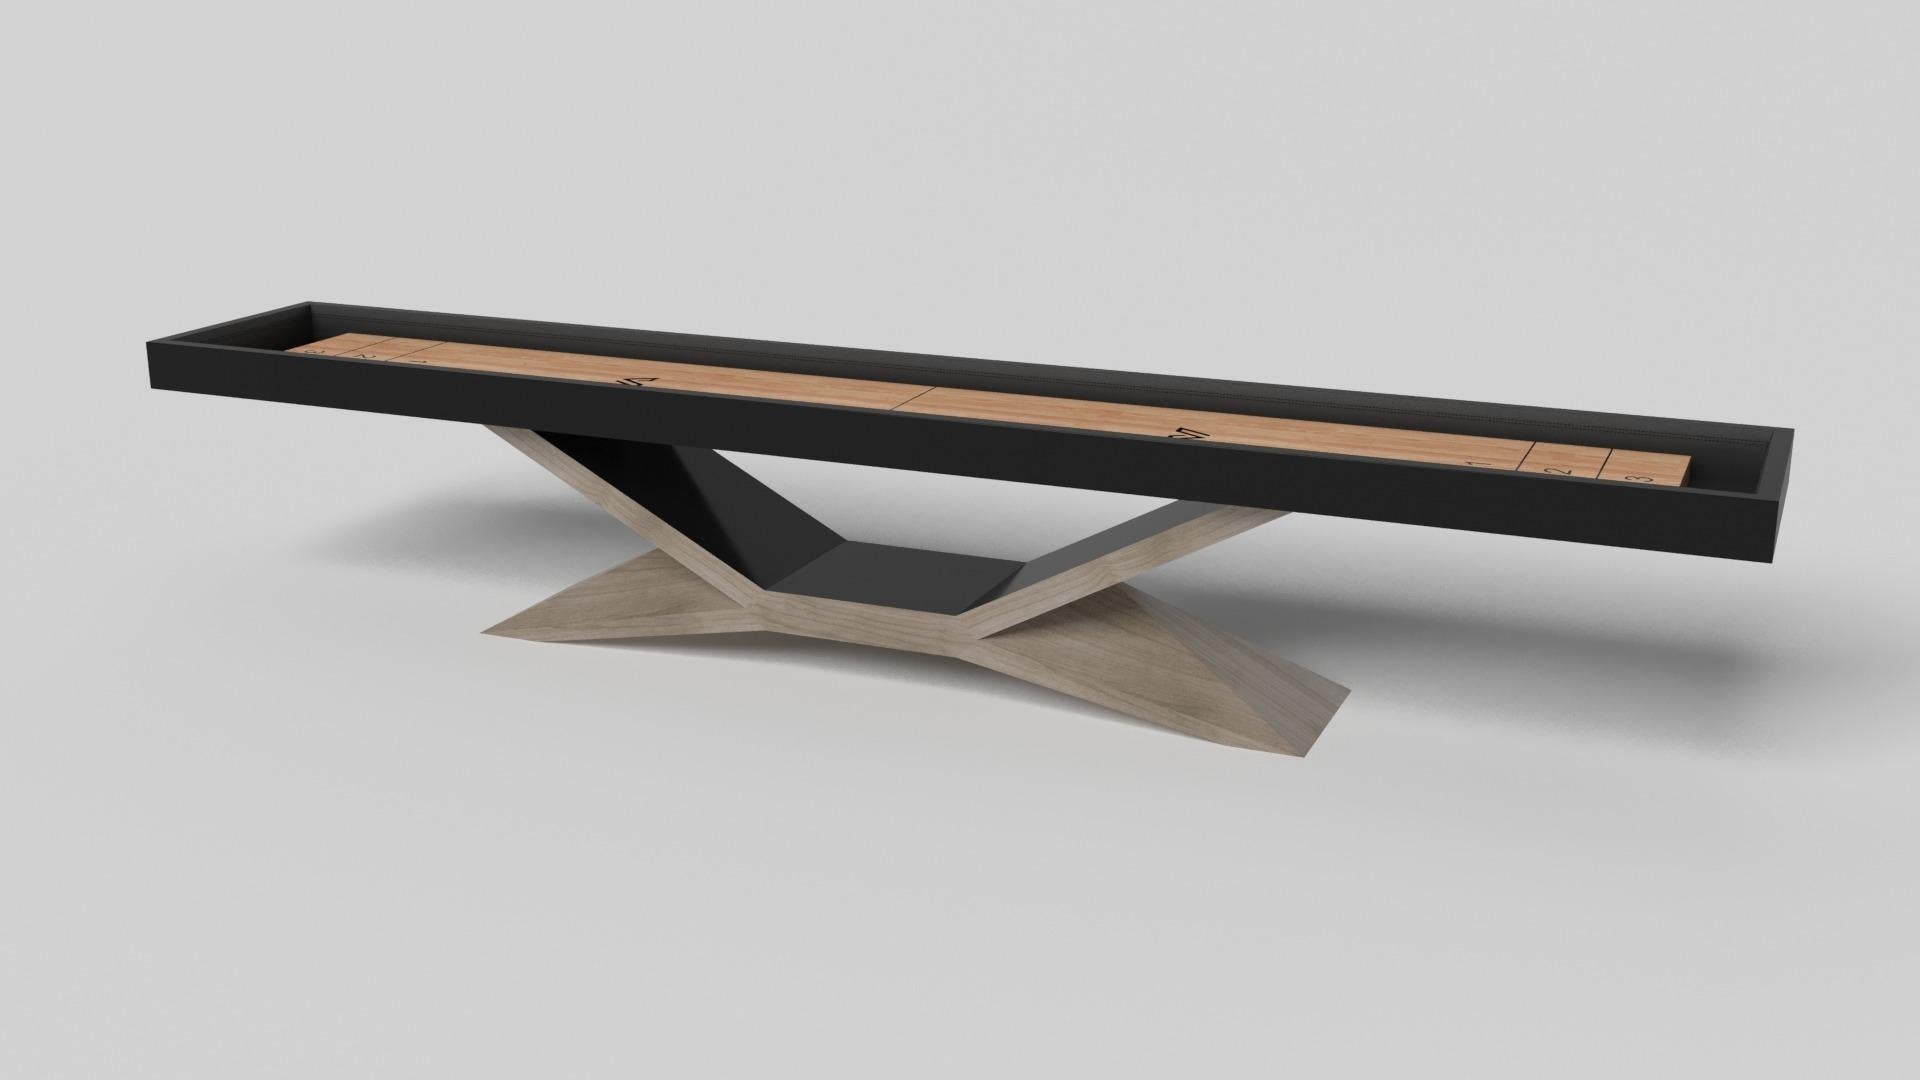 In chrome, the Kors shuffleboard table is a superior example of contrasting geometric forms. This table features an angular base that highlights the beauty of negative space from the front view. From the side view, it offers a completely different